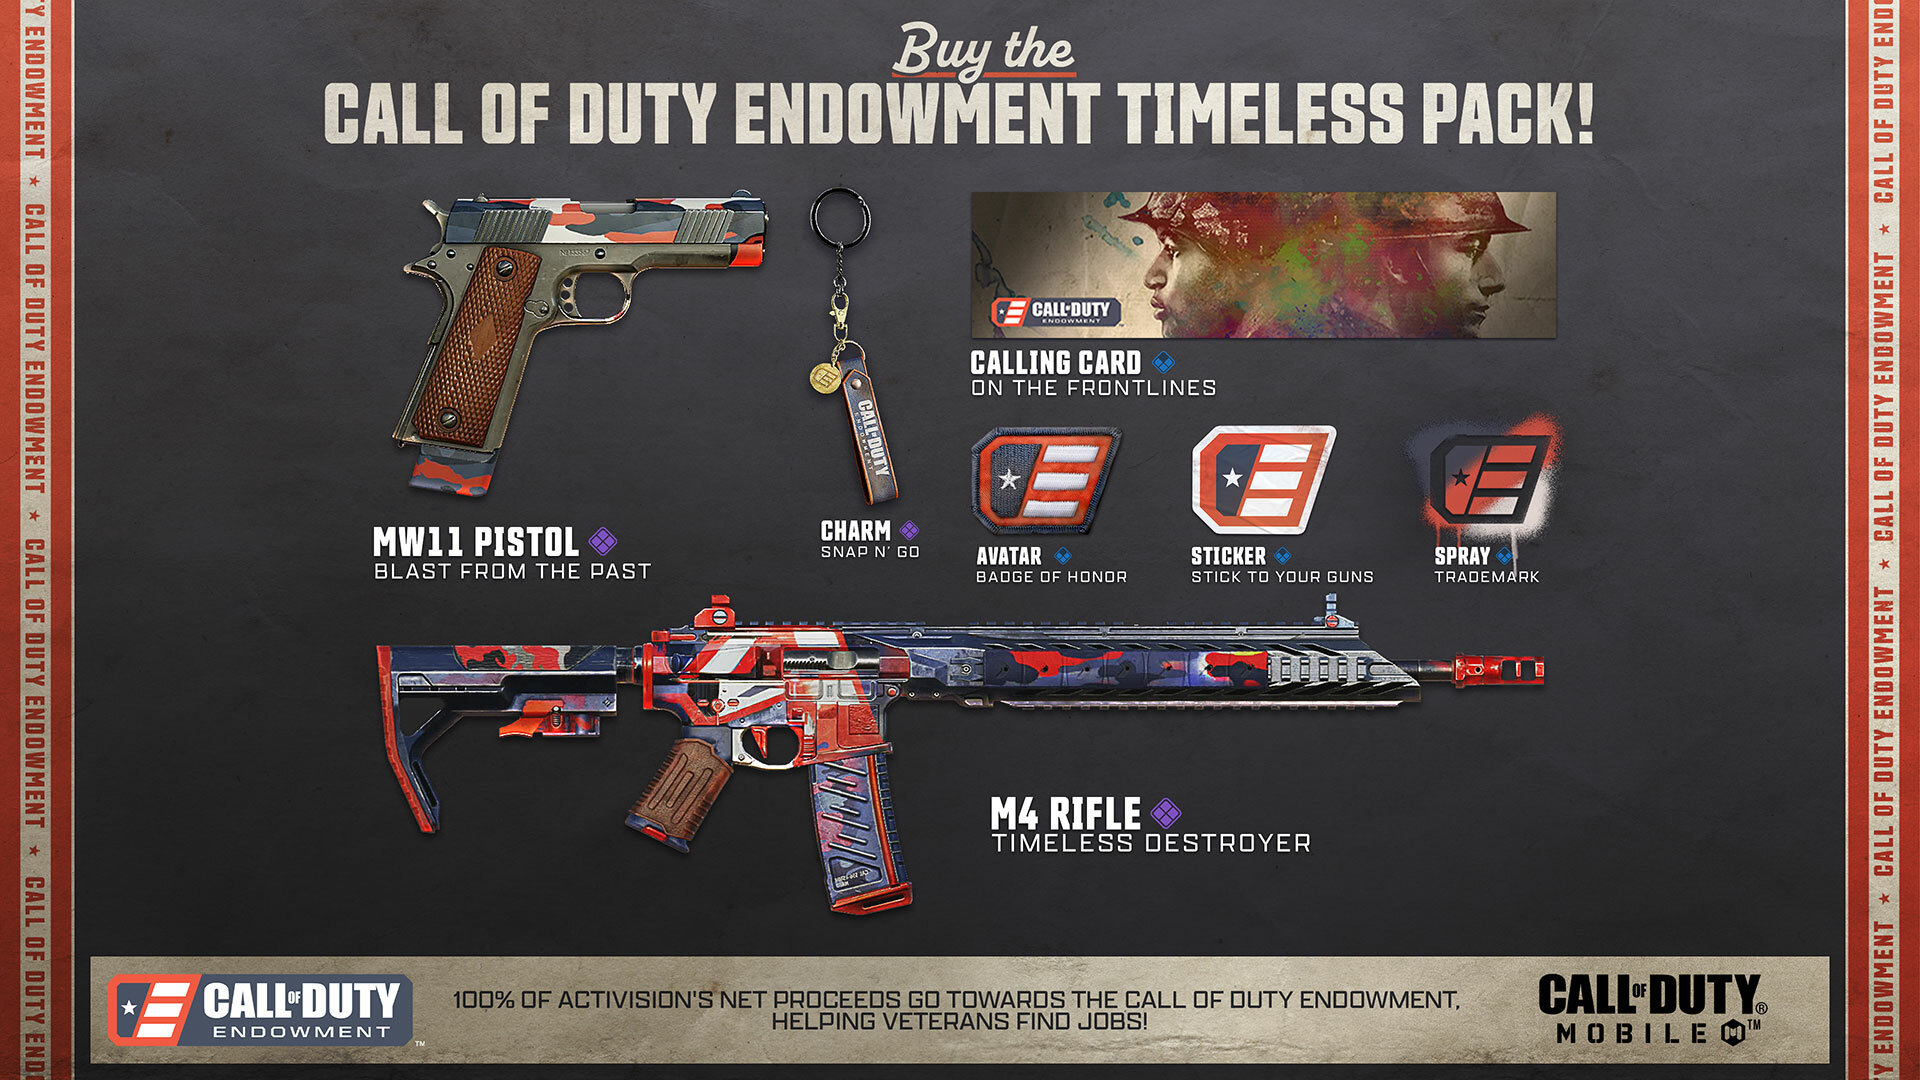 Leakers On Duty on X:  Prime Bundle M4 - Trilbal Weapon Blueprint  is now available Claim here -  Redeem on CoDM  redemption centre. #callofdutymobile #codm #codmobile   / X